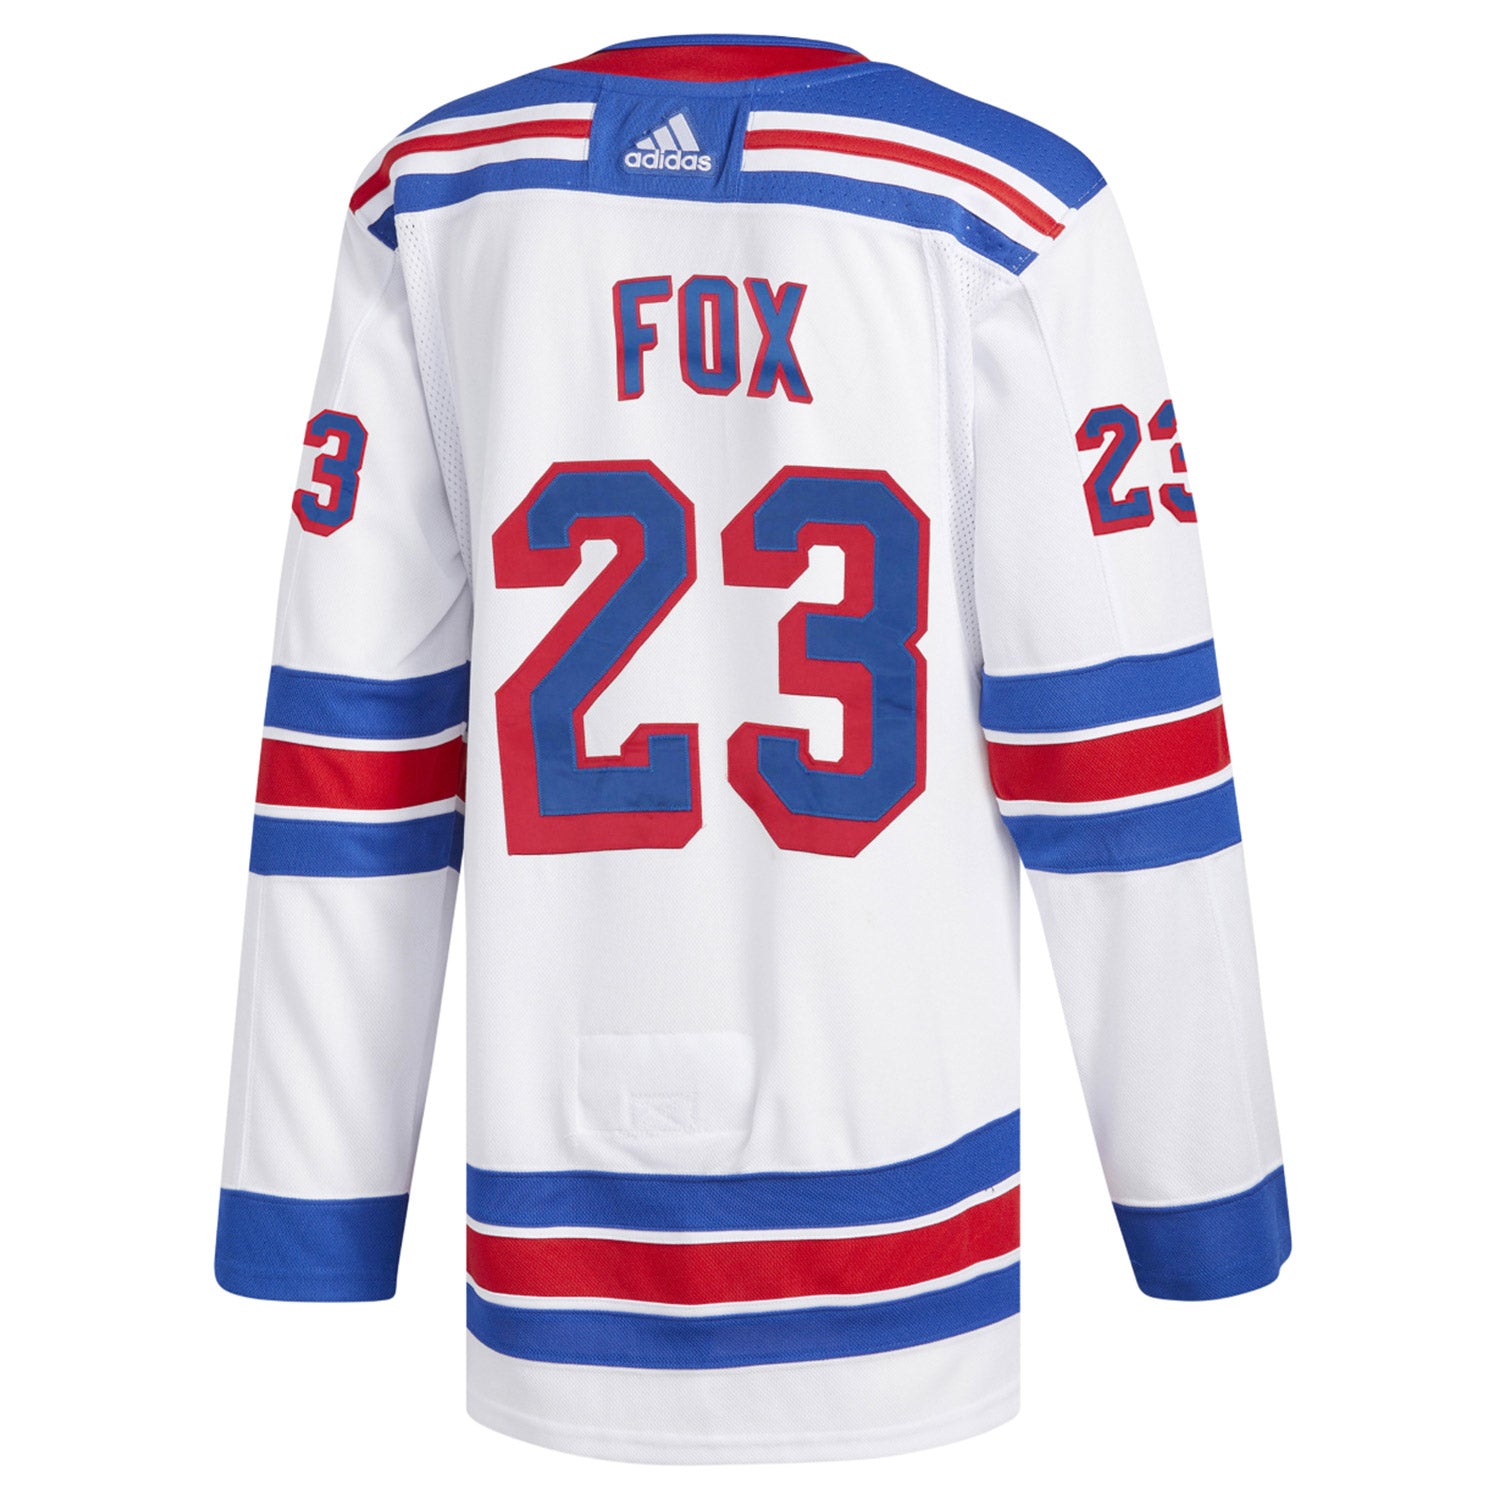 Adam Fox White New York Rangers Autographed adidas Authentic Jersey with  2021 Norris Inscription